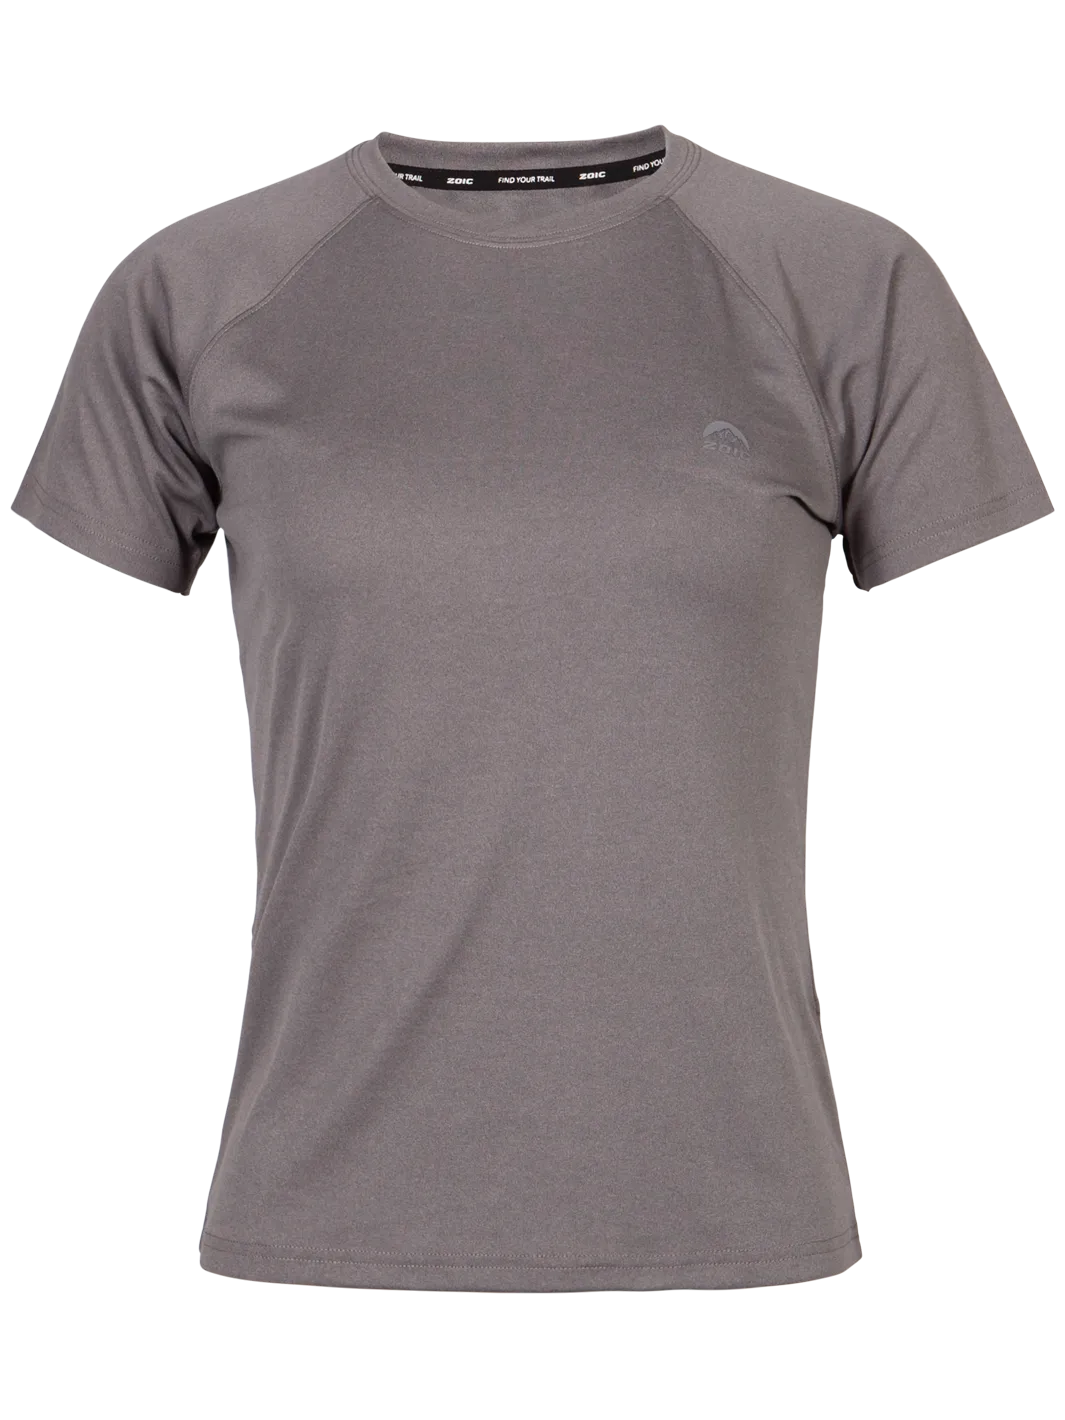 Grey Heather Avery Jersey#color_grey-heather